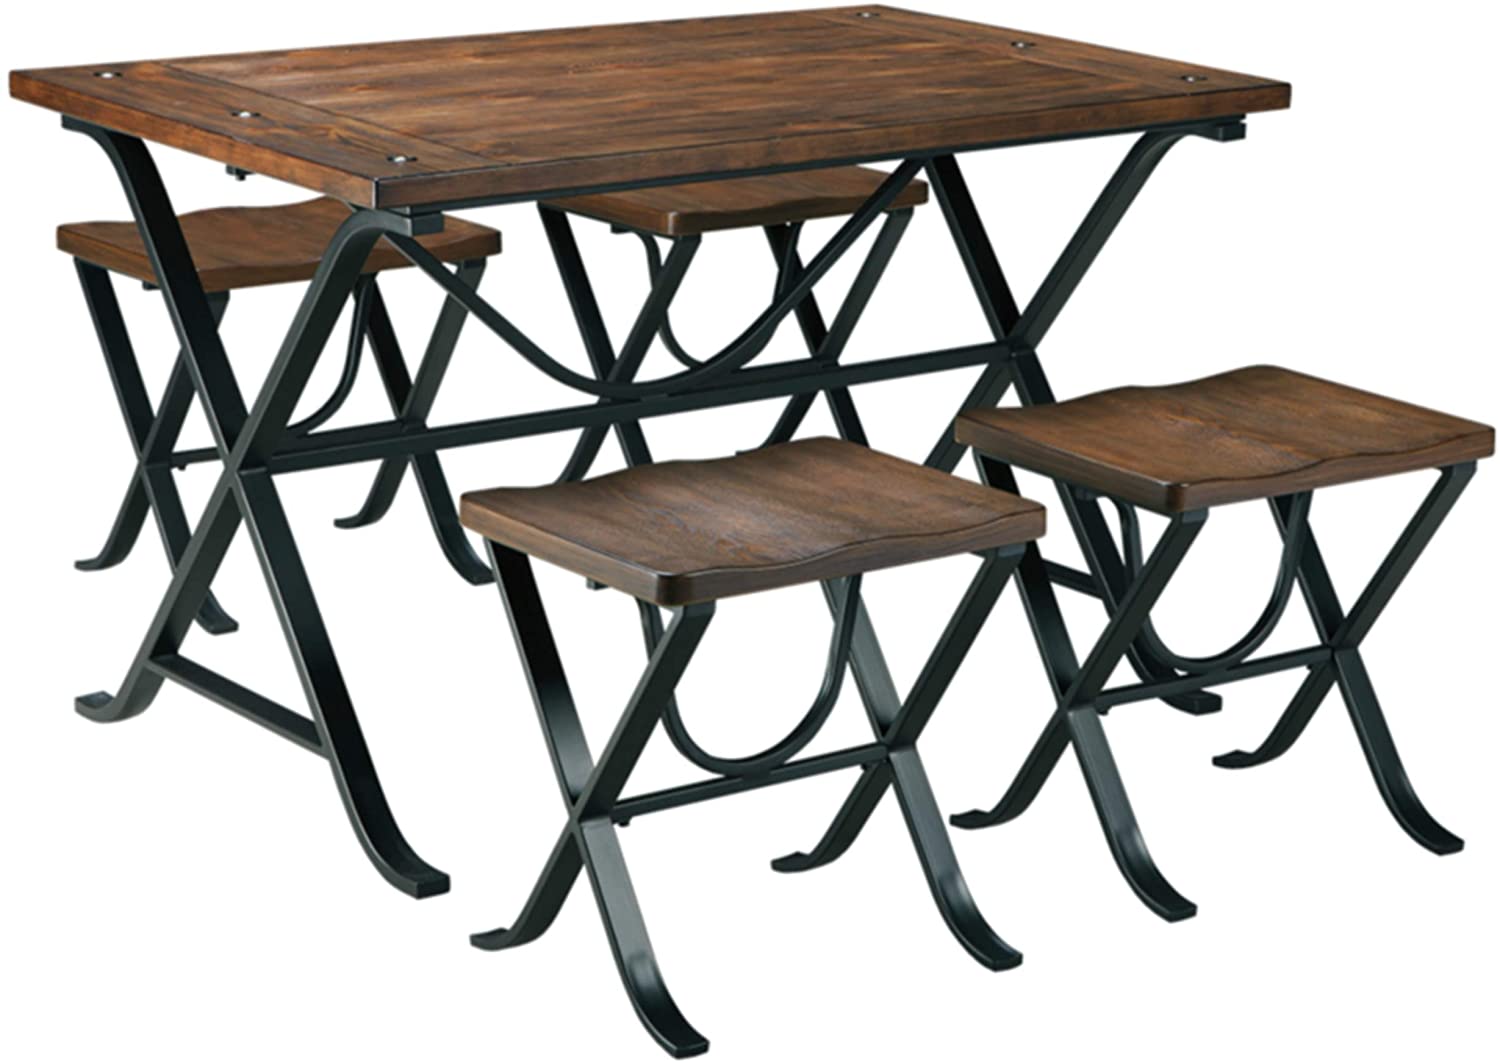 Ashley Furniture Signature Design - Freimore Dining Room Table and Stools - Set of 5 - Medium Brown Wood Top and Black Metal Legs